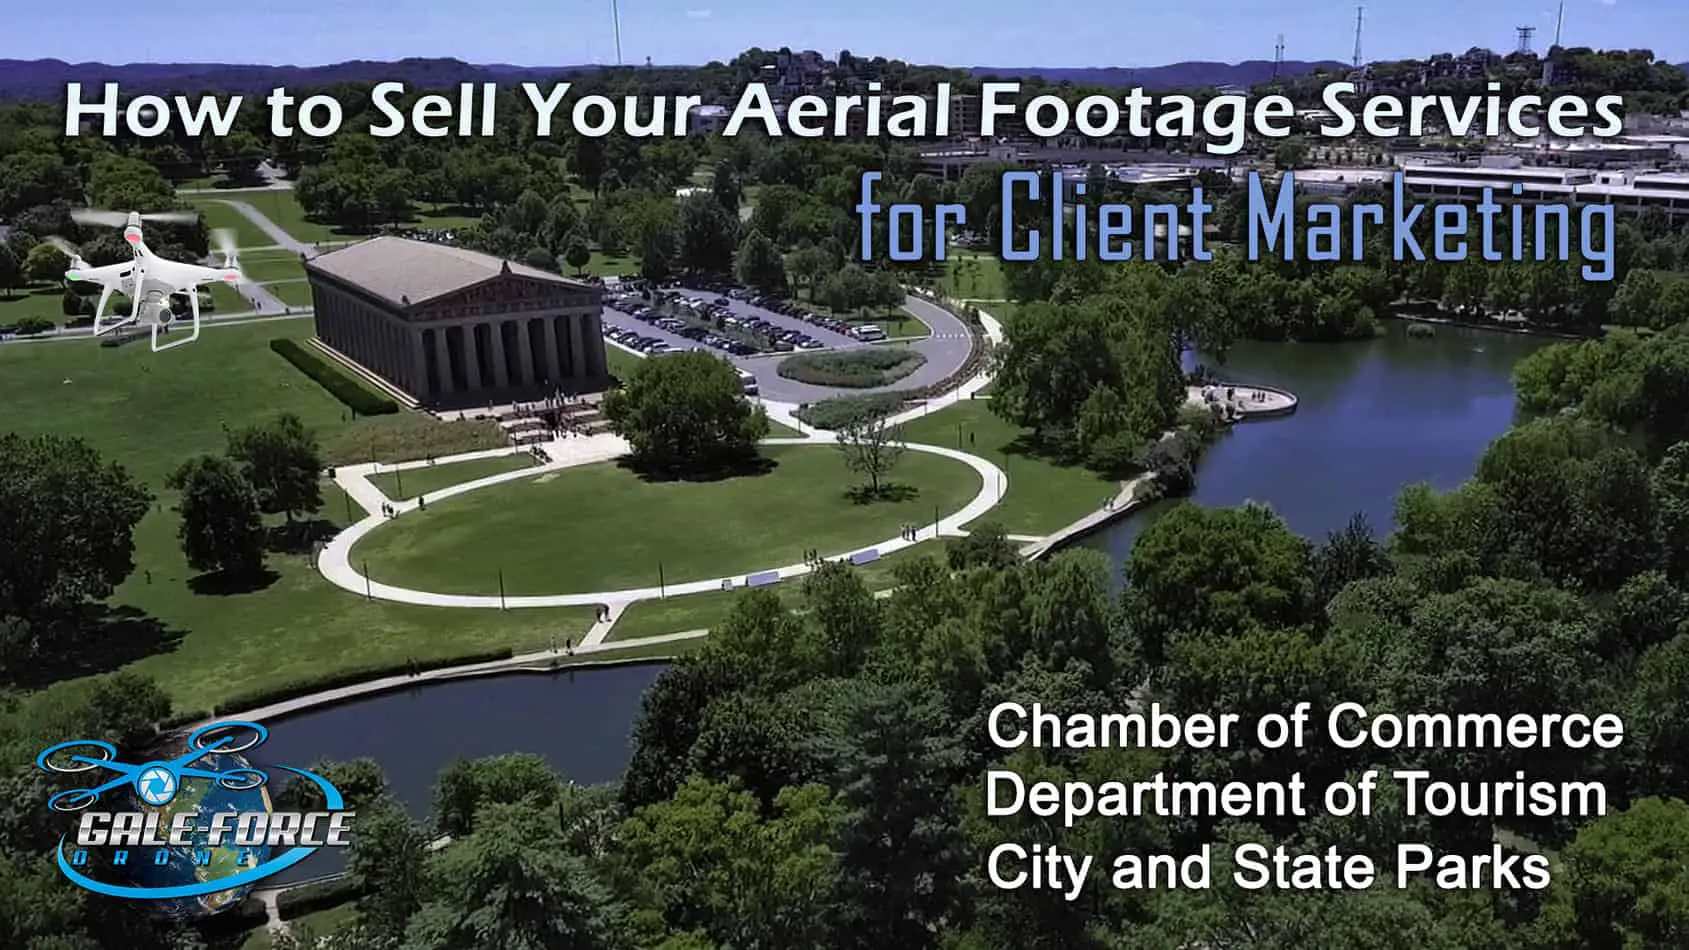 How to sell your aerial footage services for client marketing